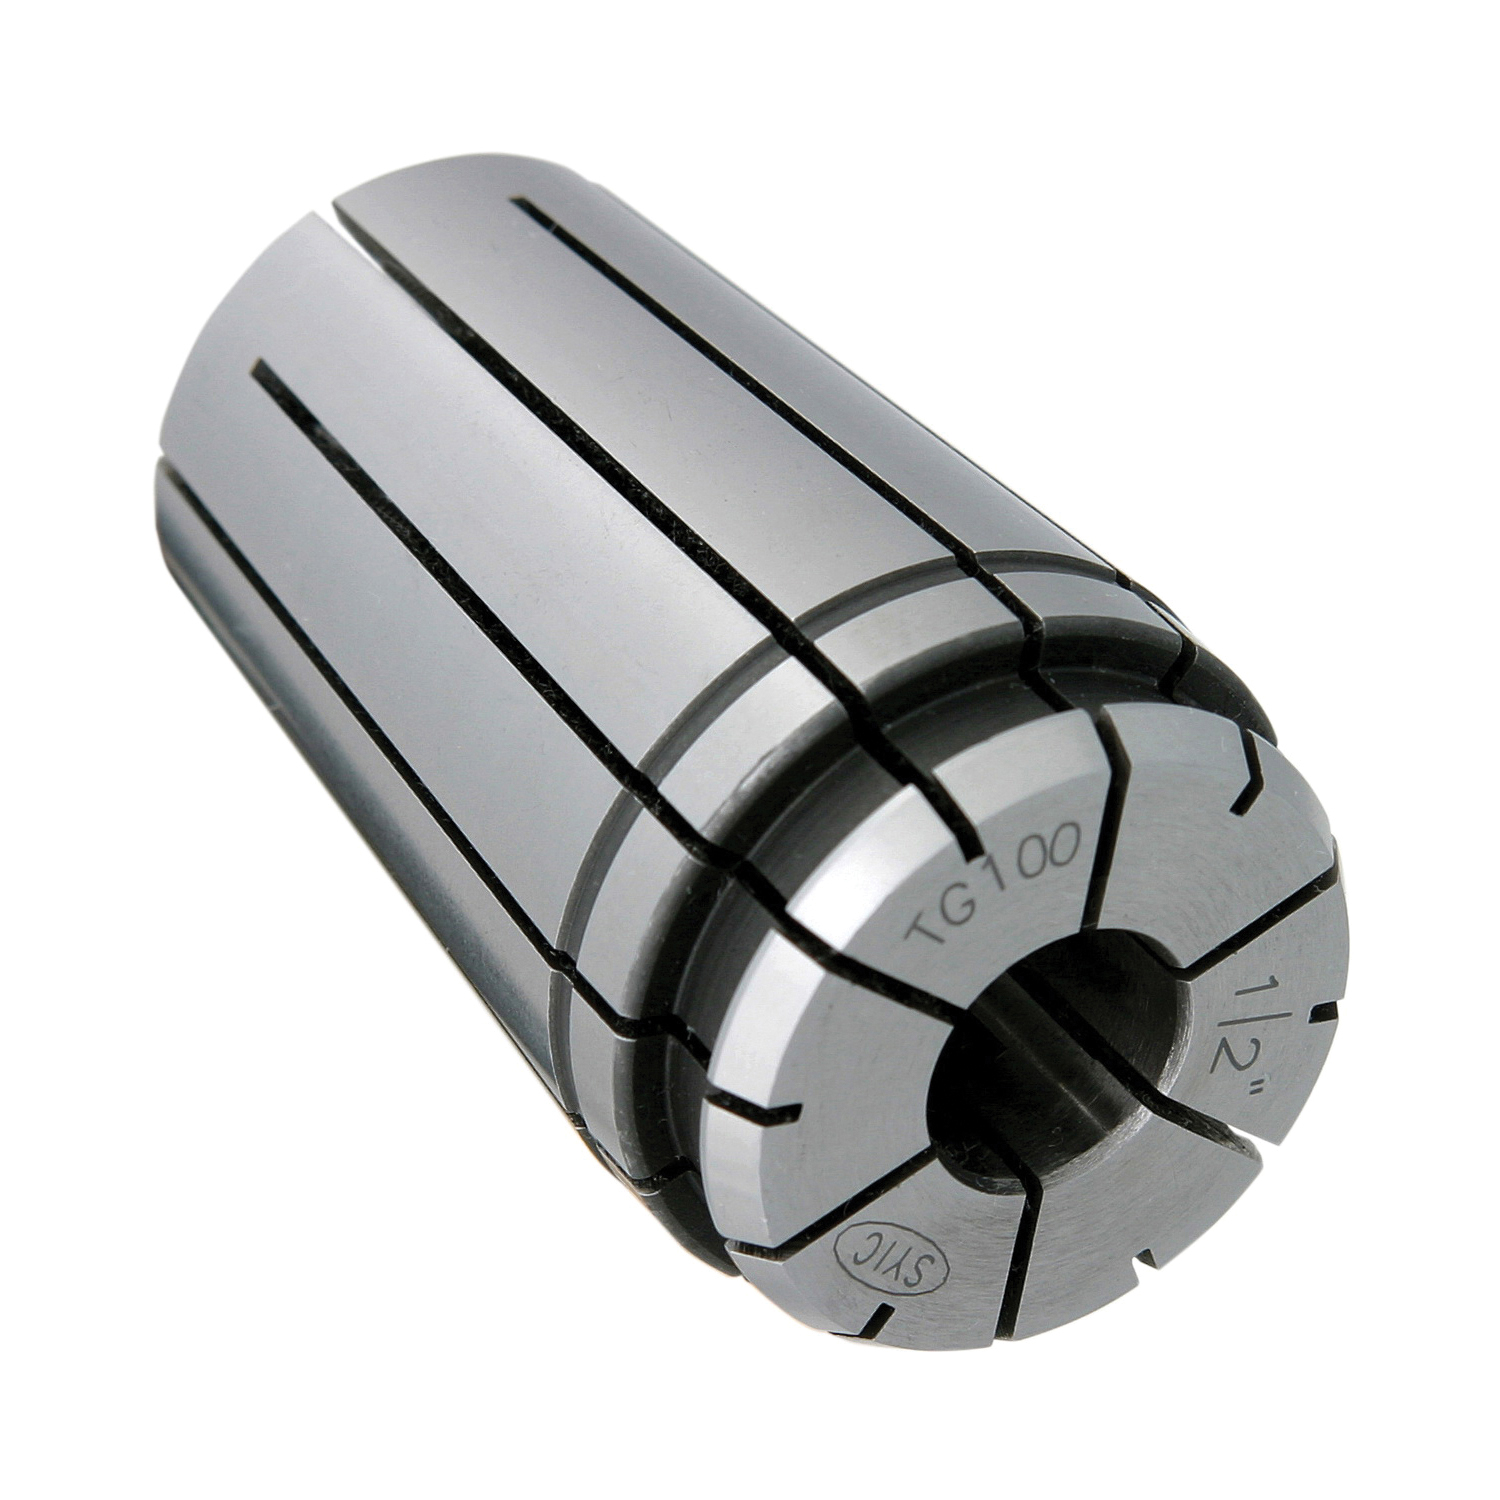 TG100 31/64" COLLET